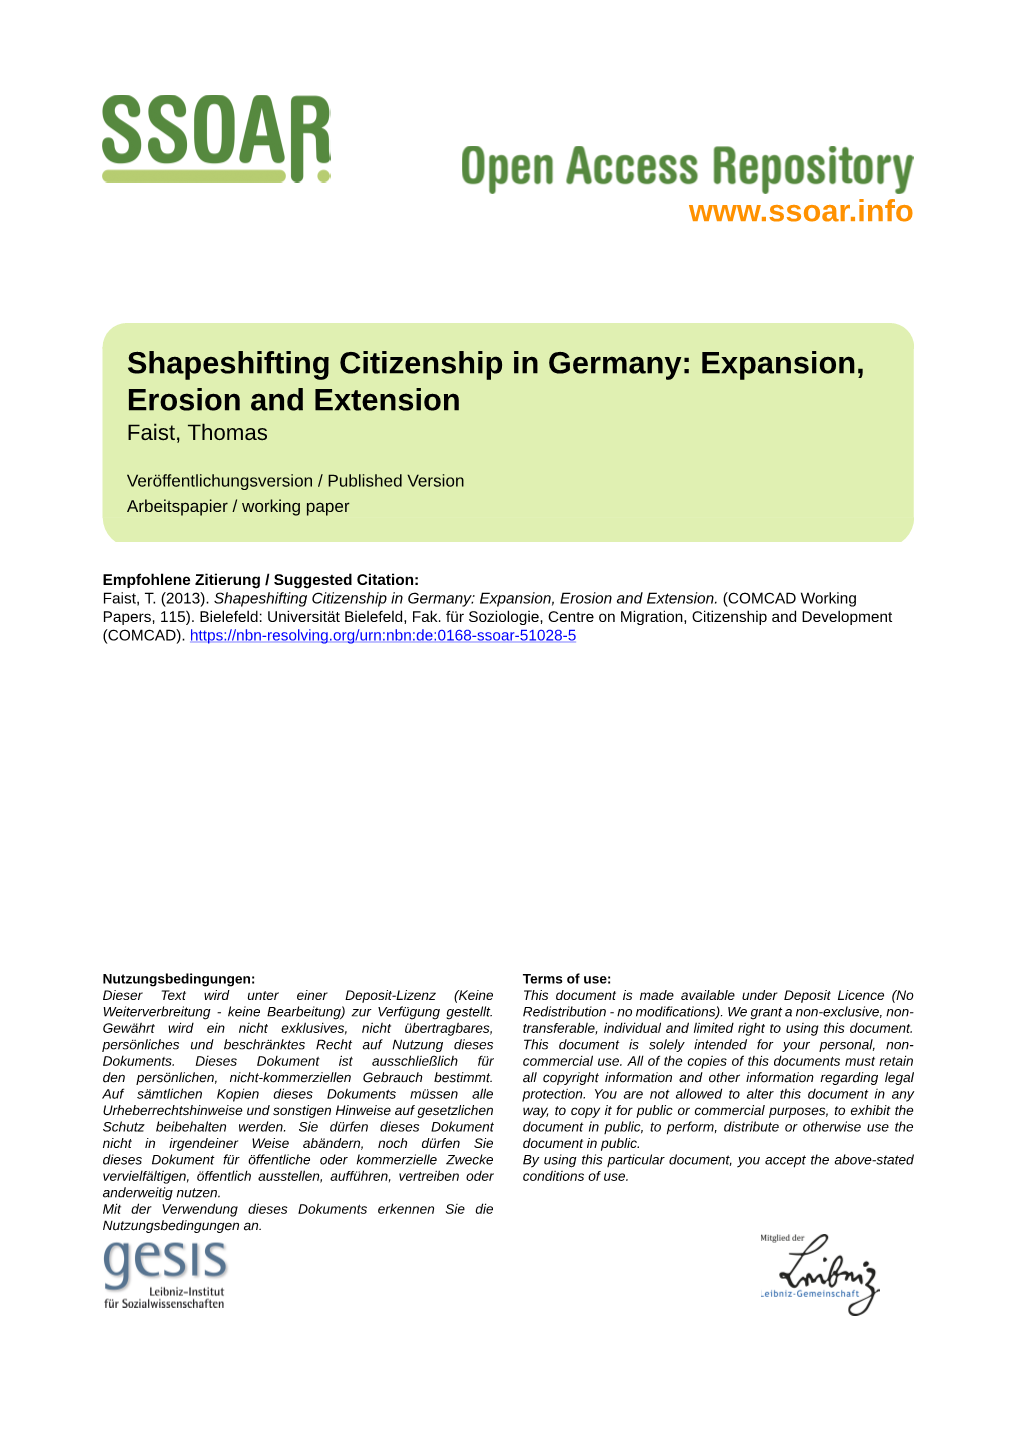 Shapeshifting Citizenship in Germany: Expansion, Erosion and Extension Faist, Thomas